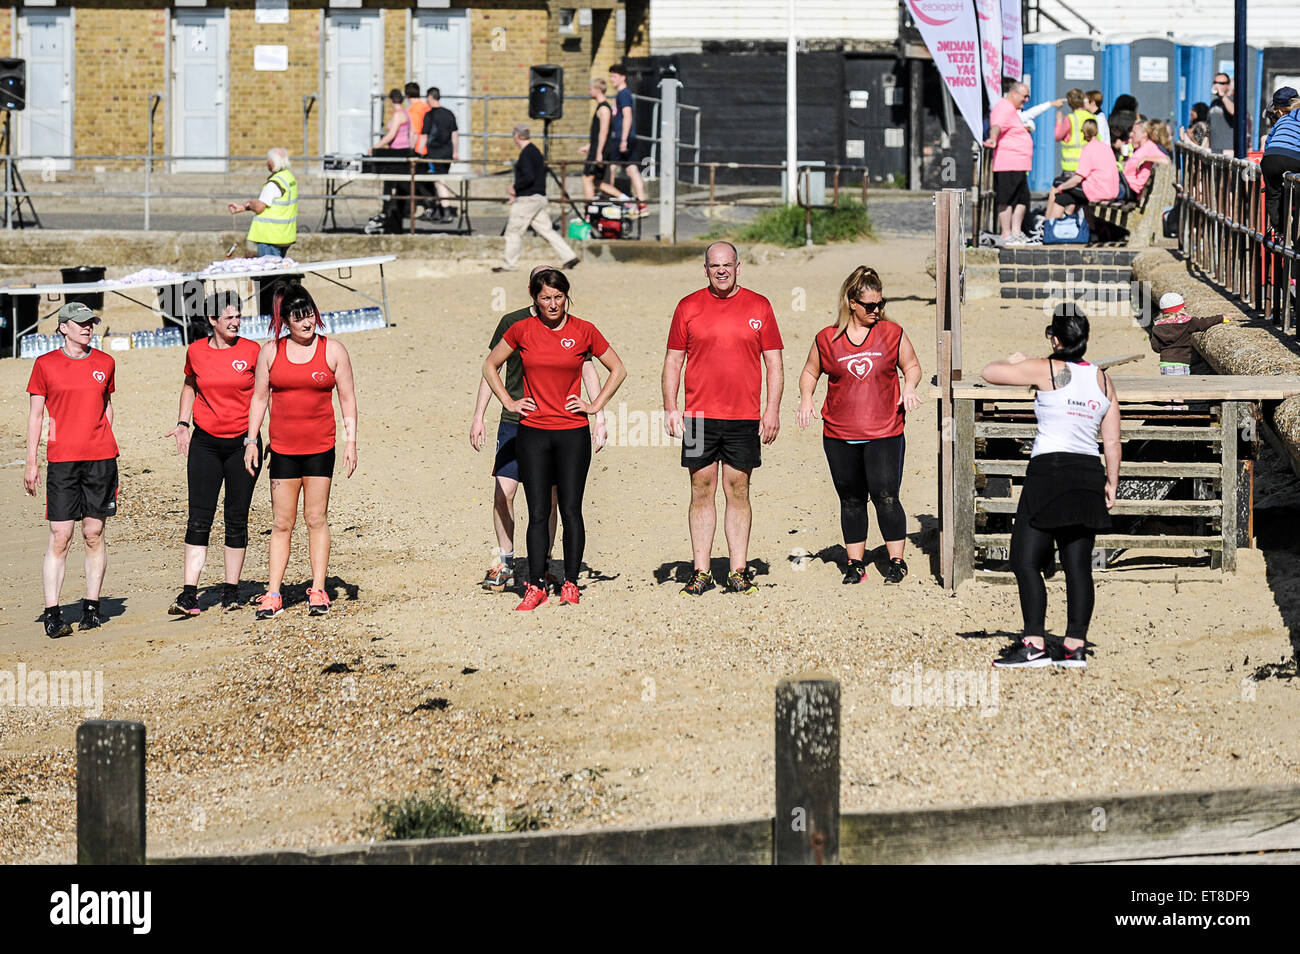 A fitness boot camp on the beach at leigh on Sea in Essex. Stock Photo